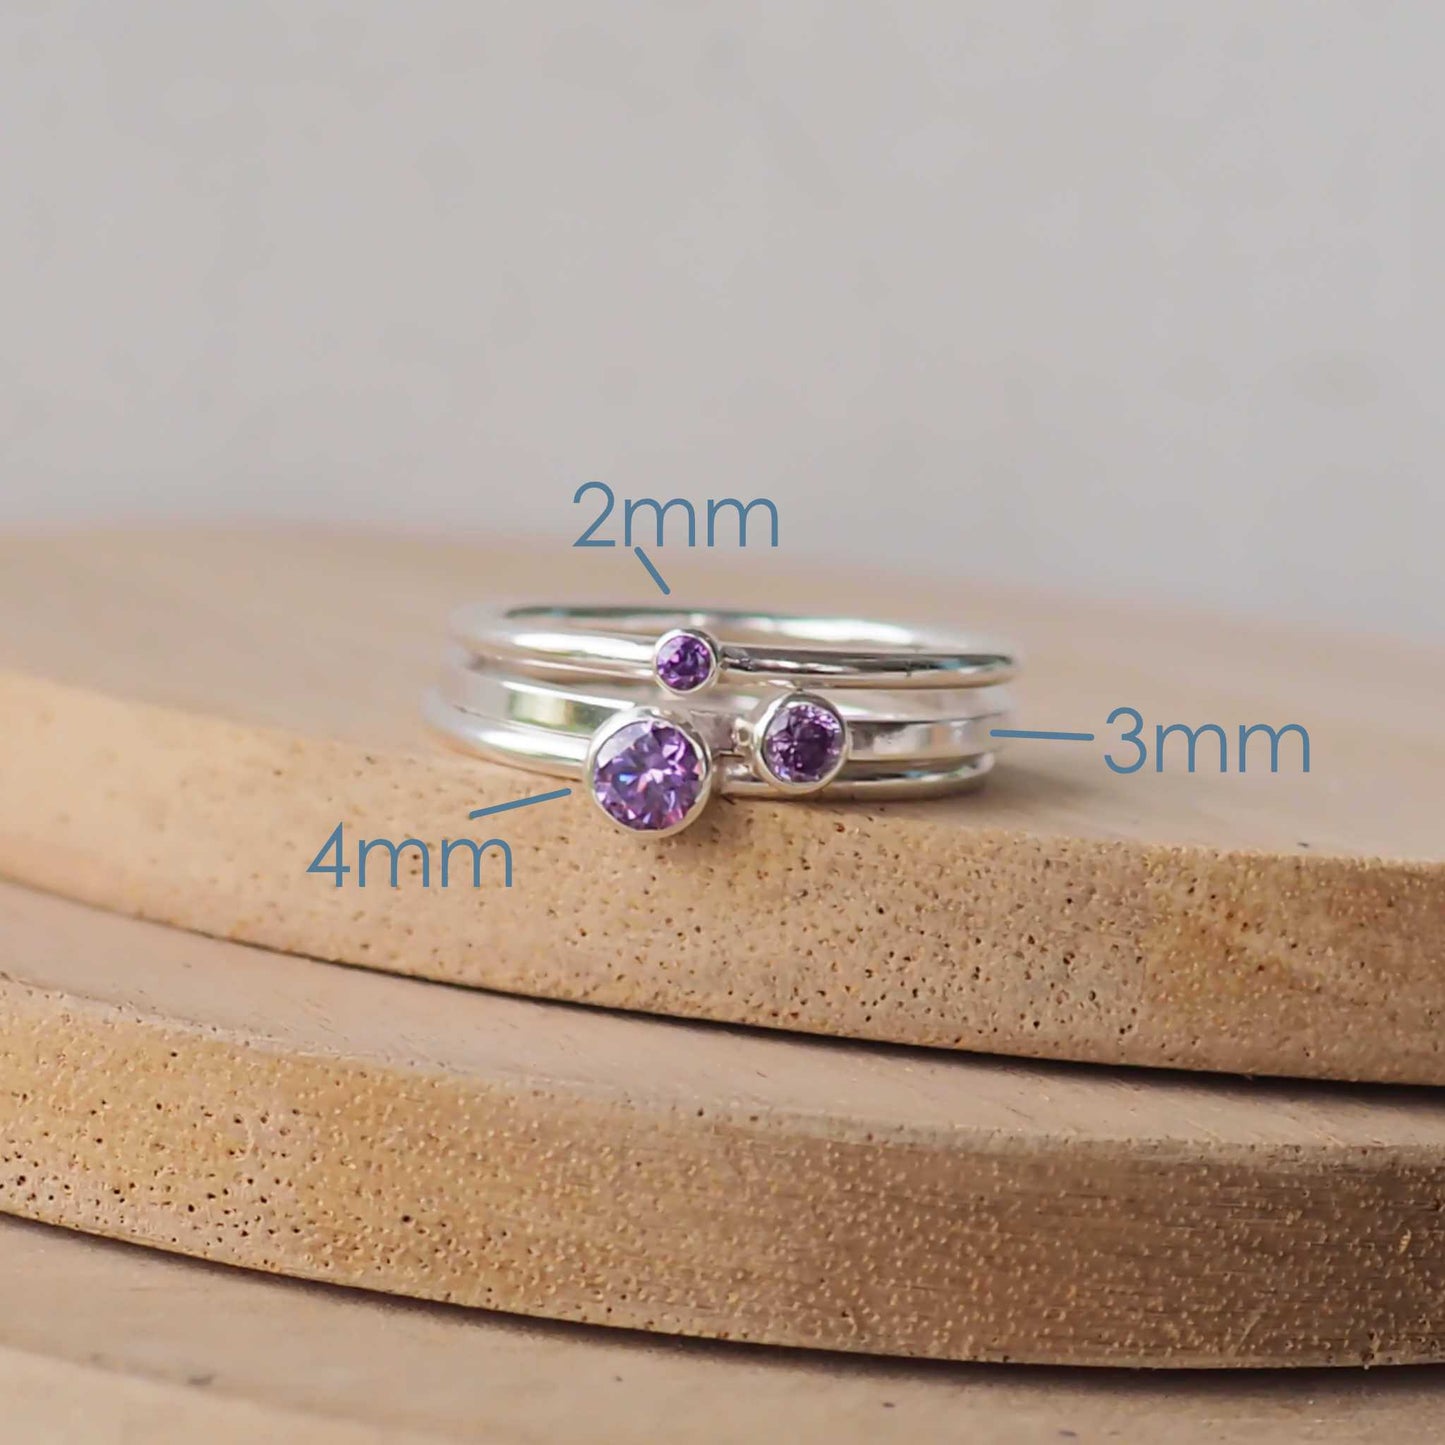 Three rings showing the square and round band styles with three different sized Cubic Zirconia in a deep purple Amethyst. The rings are made from Sterling Silver and a round purple cubic zirconia measuring 2,3 or 4mm in size. Handmade by maram jewellery in Scotland